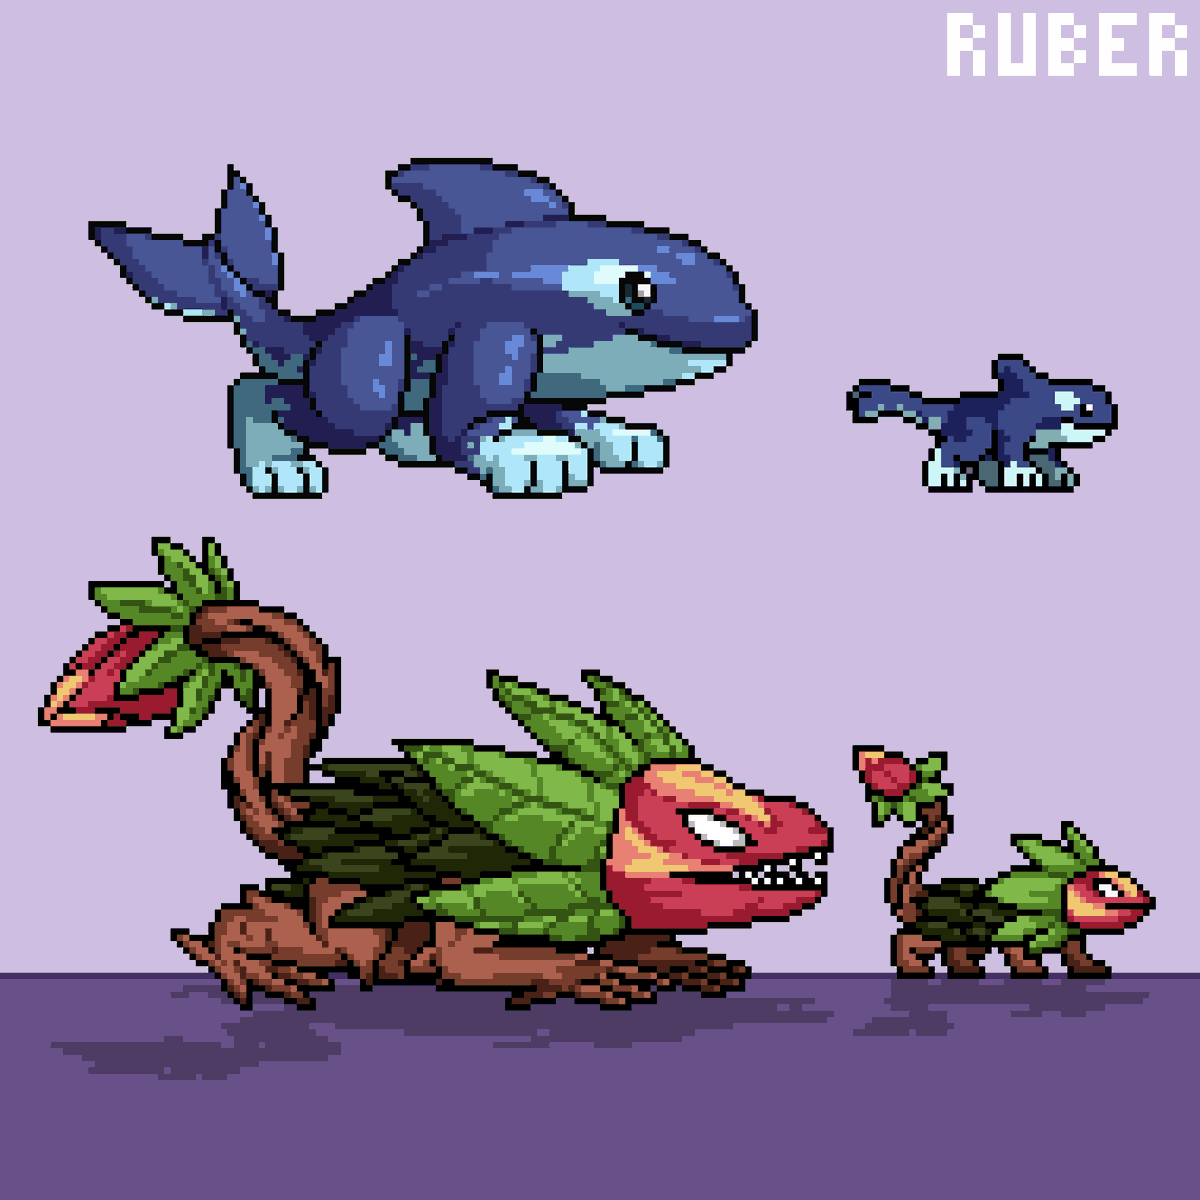 Arboris sprite in #Fraymakers artstyle. I think im getting the hang of this. #pixelart